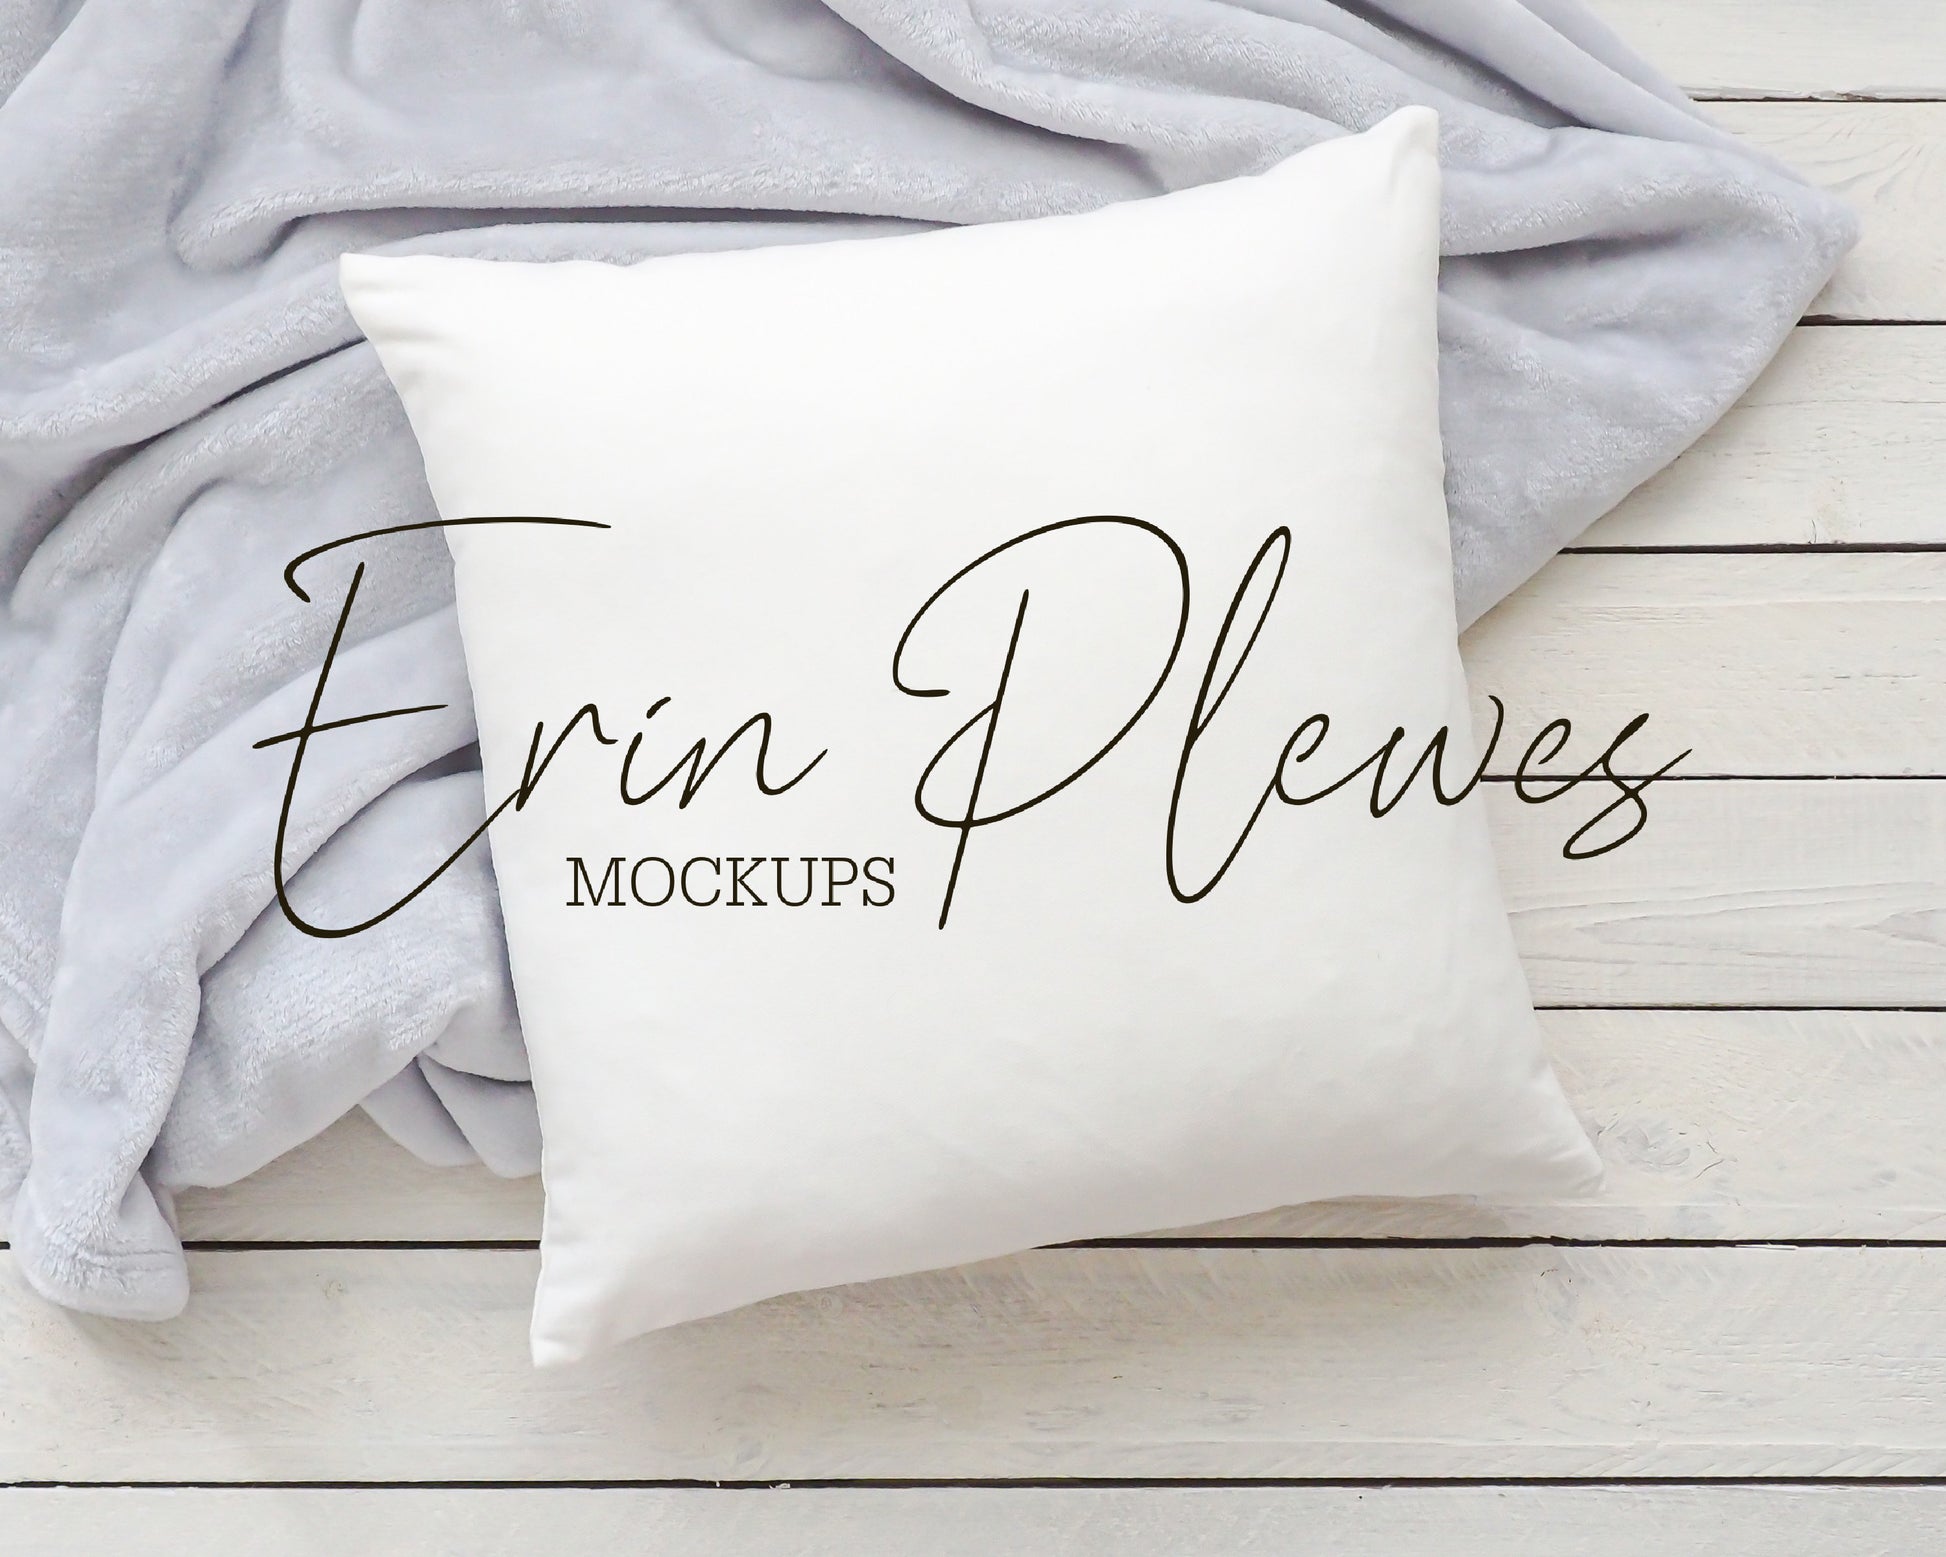 Pillow Case Mockup, Pillow mockup with gray blanket for lifestyle stock photo, Square pillow mock up, Jpeg Digital Download